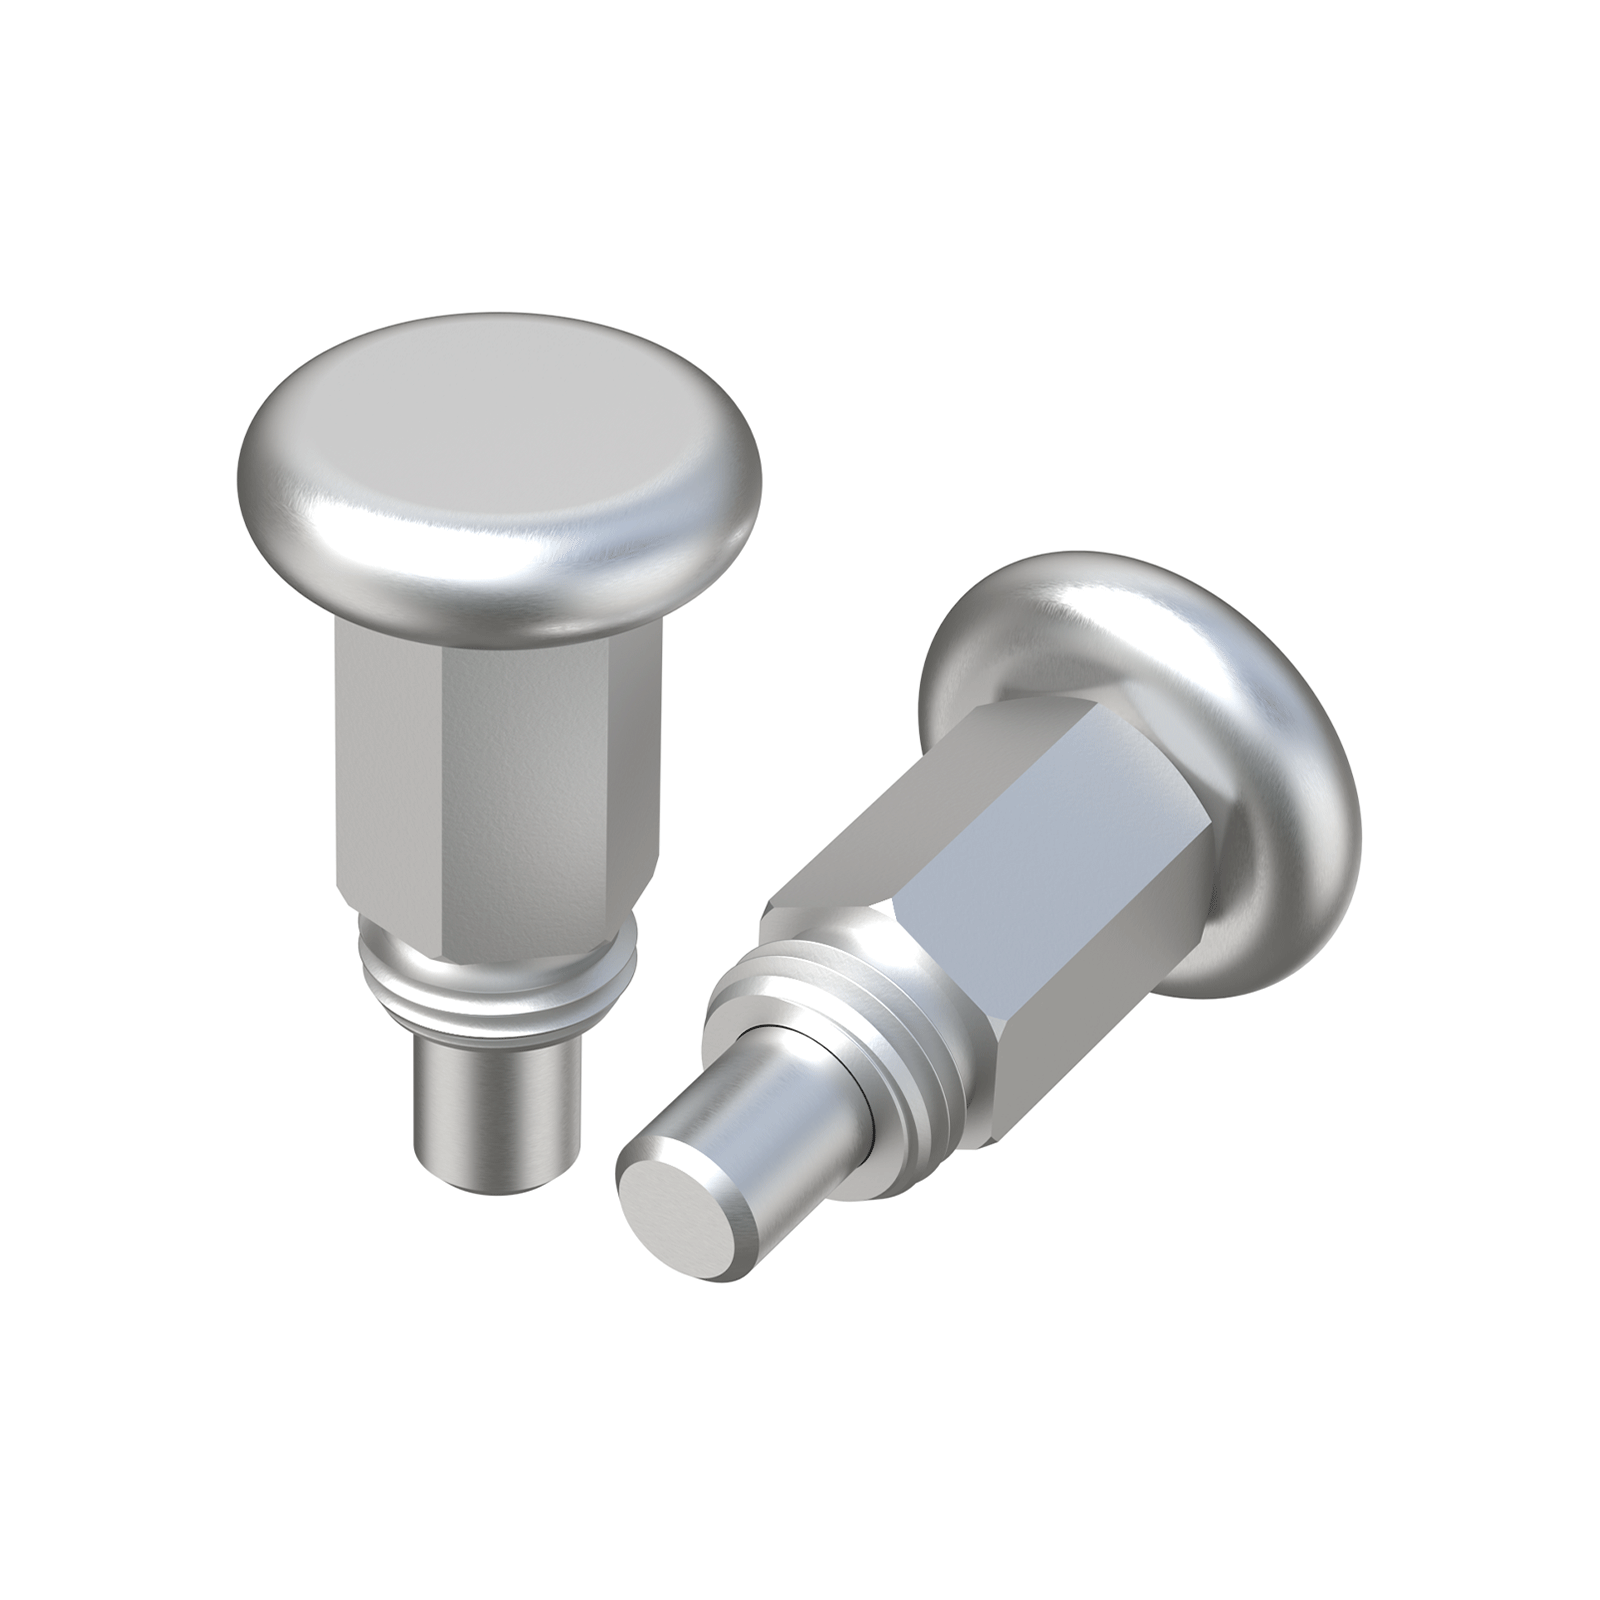 Index bolt with hex metal head without stop